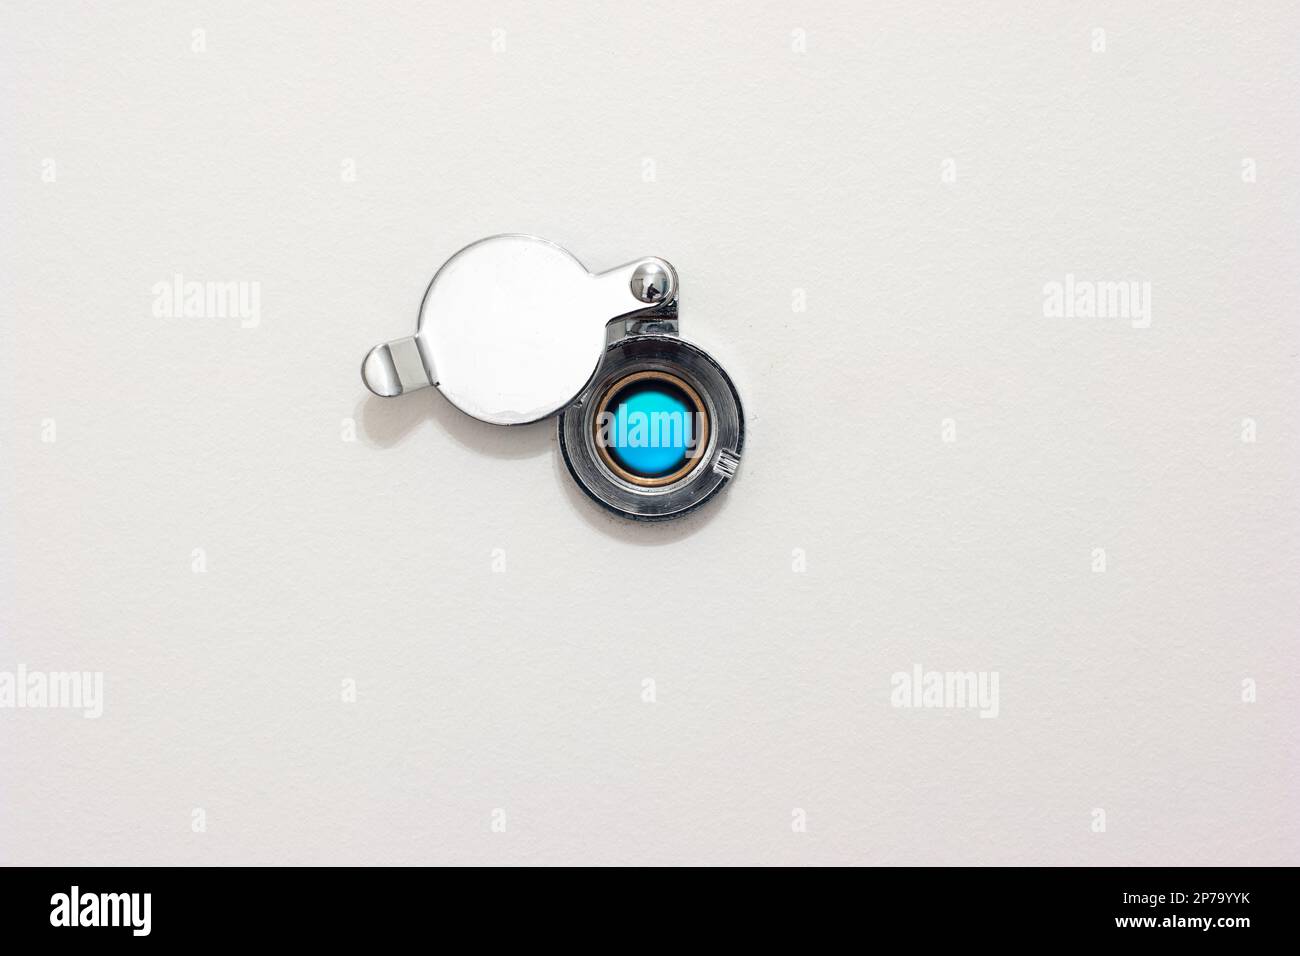 Home door peephole with metal lid cover white wood background macro close up shot. Stock Photo